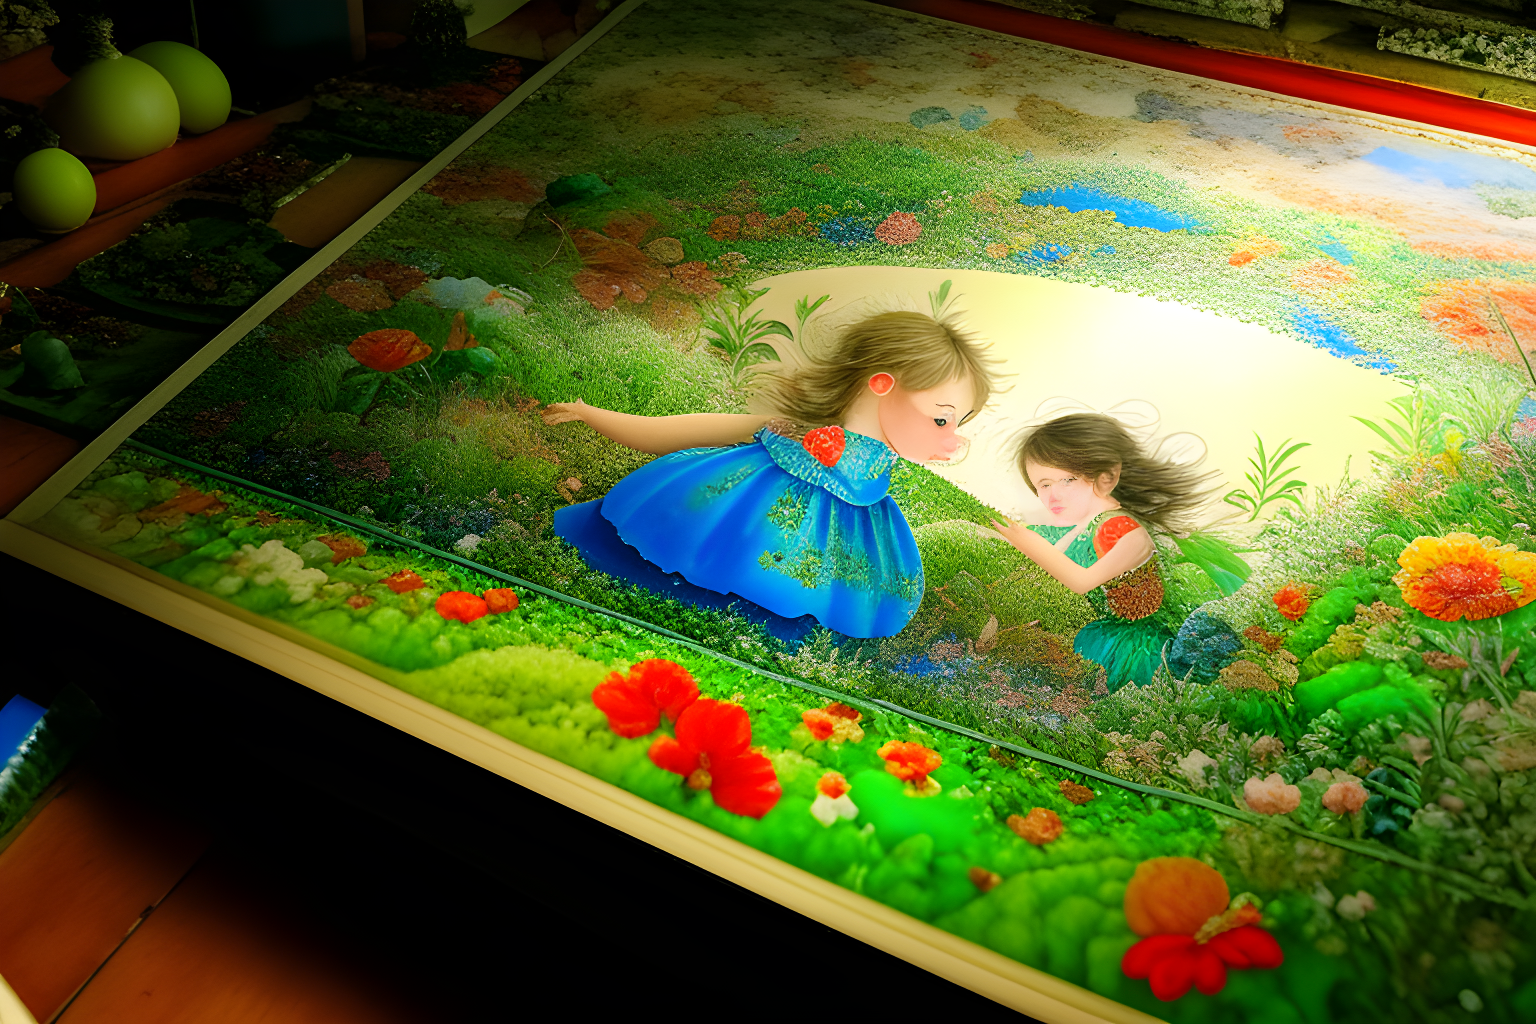 art on a fairy tale book coming to life